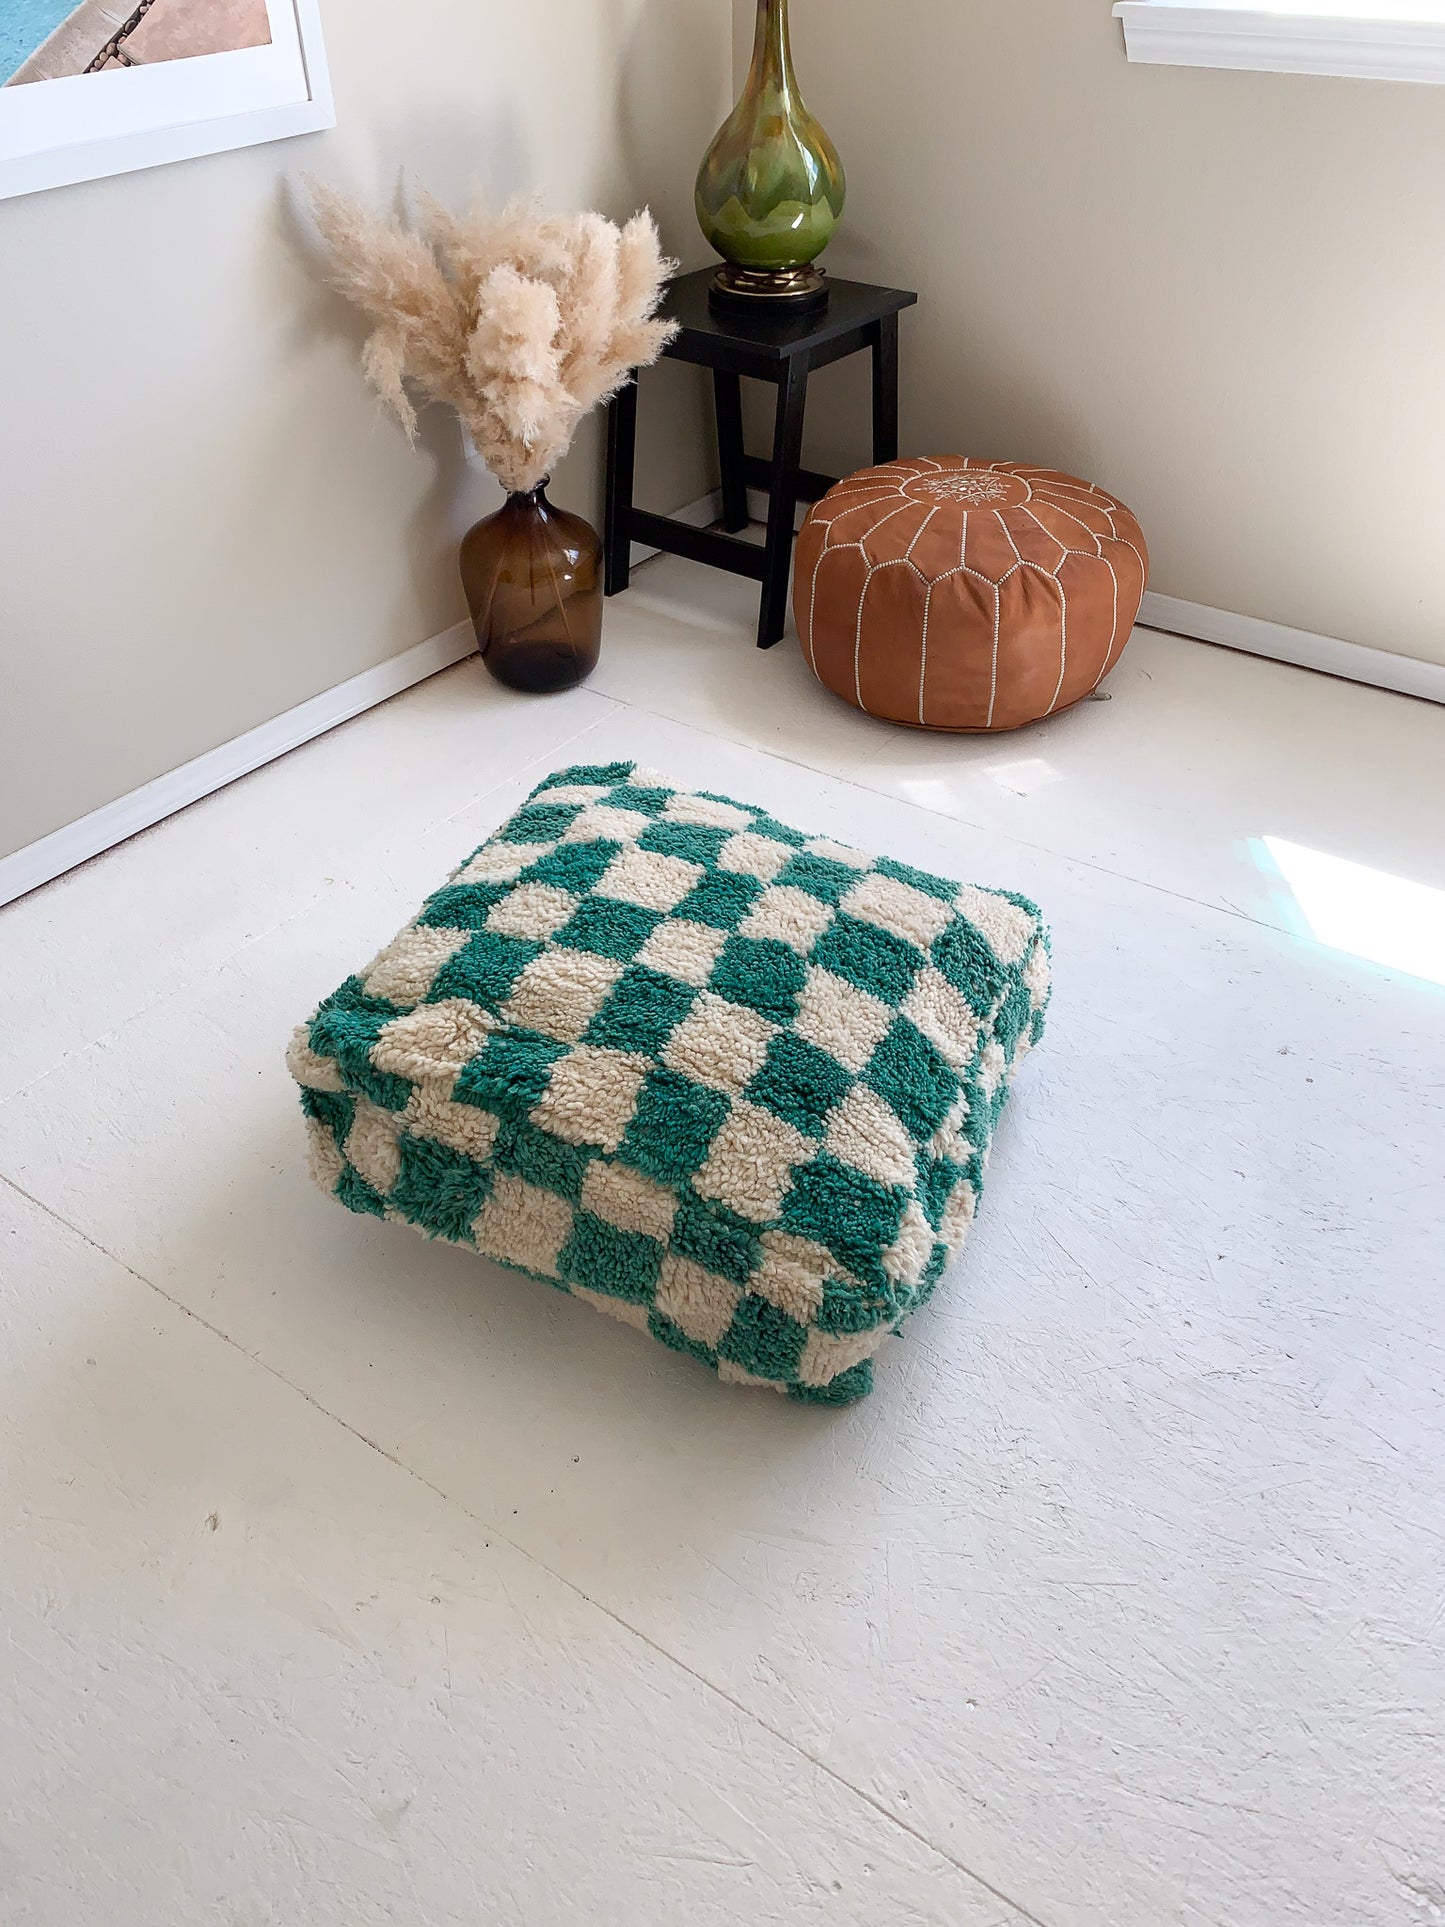 Teal Checkered Moroccan Rug Floor Pouf / Pet Bed